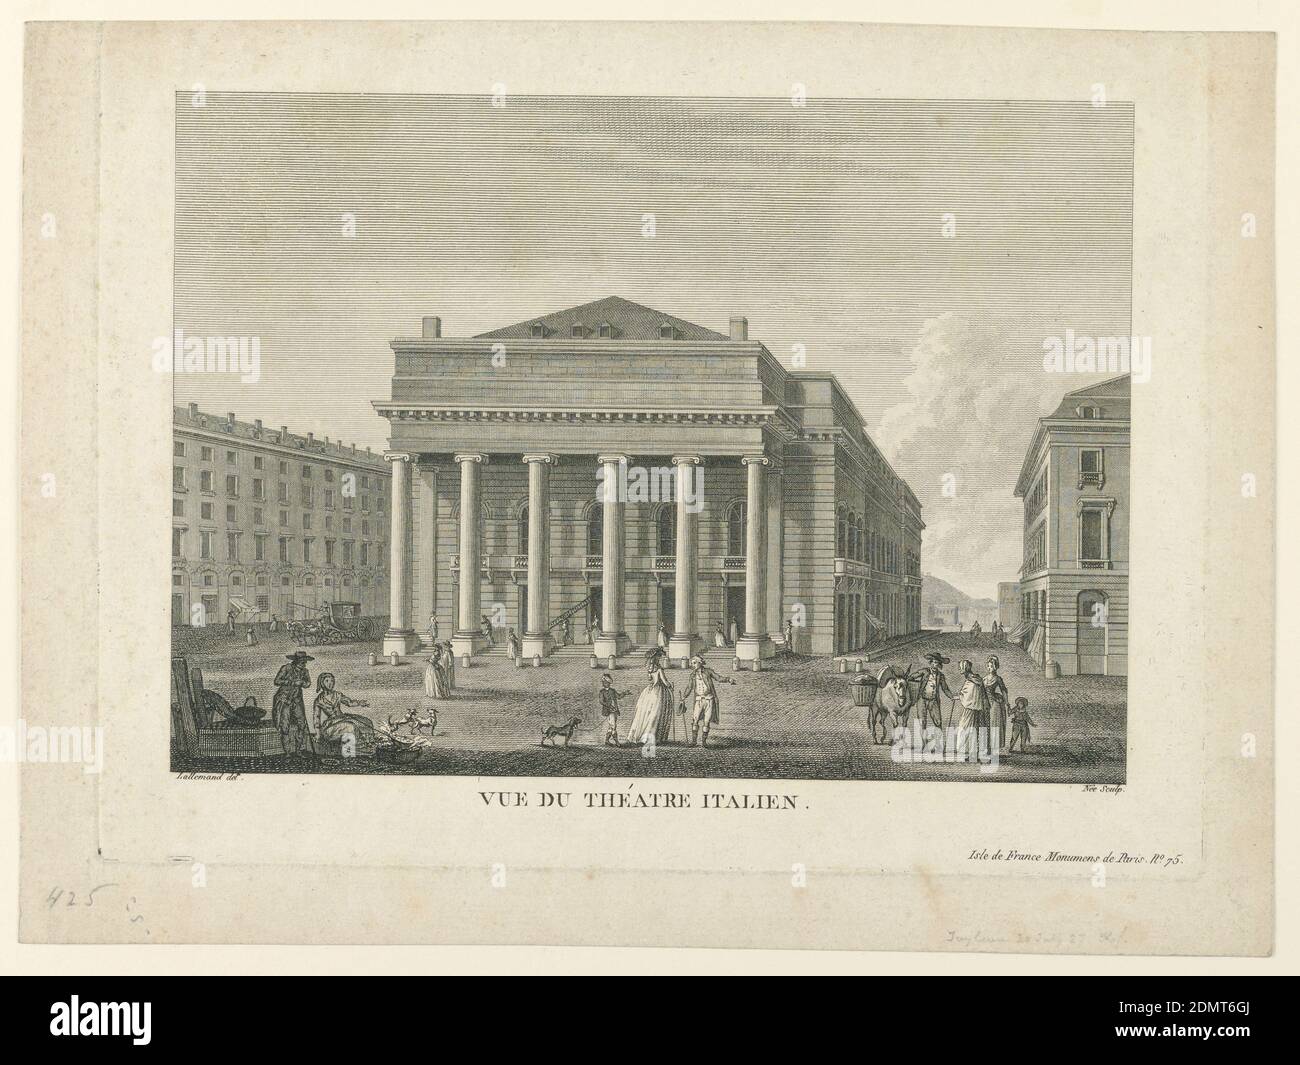 Theatre Italien, Paris, Engraving on paper, Horizontal rectangle. No. 75 of the same publication as -1392. Shown obliquely from the left corner of the frontside with the houses of the flanking streets and houses and a hill visible at the end of the right street. The caption reads beside the signature and the name of the publication: 'VUE DU THEATRE ITALIEN'., Europe and USA, Paris, France, 1790–1795, architecture, Print Stock Photo